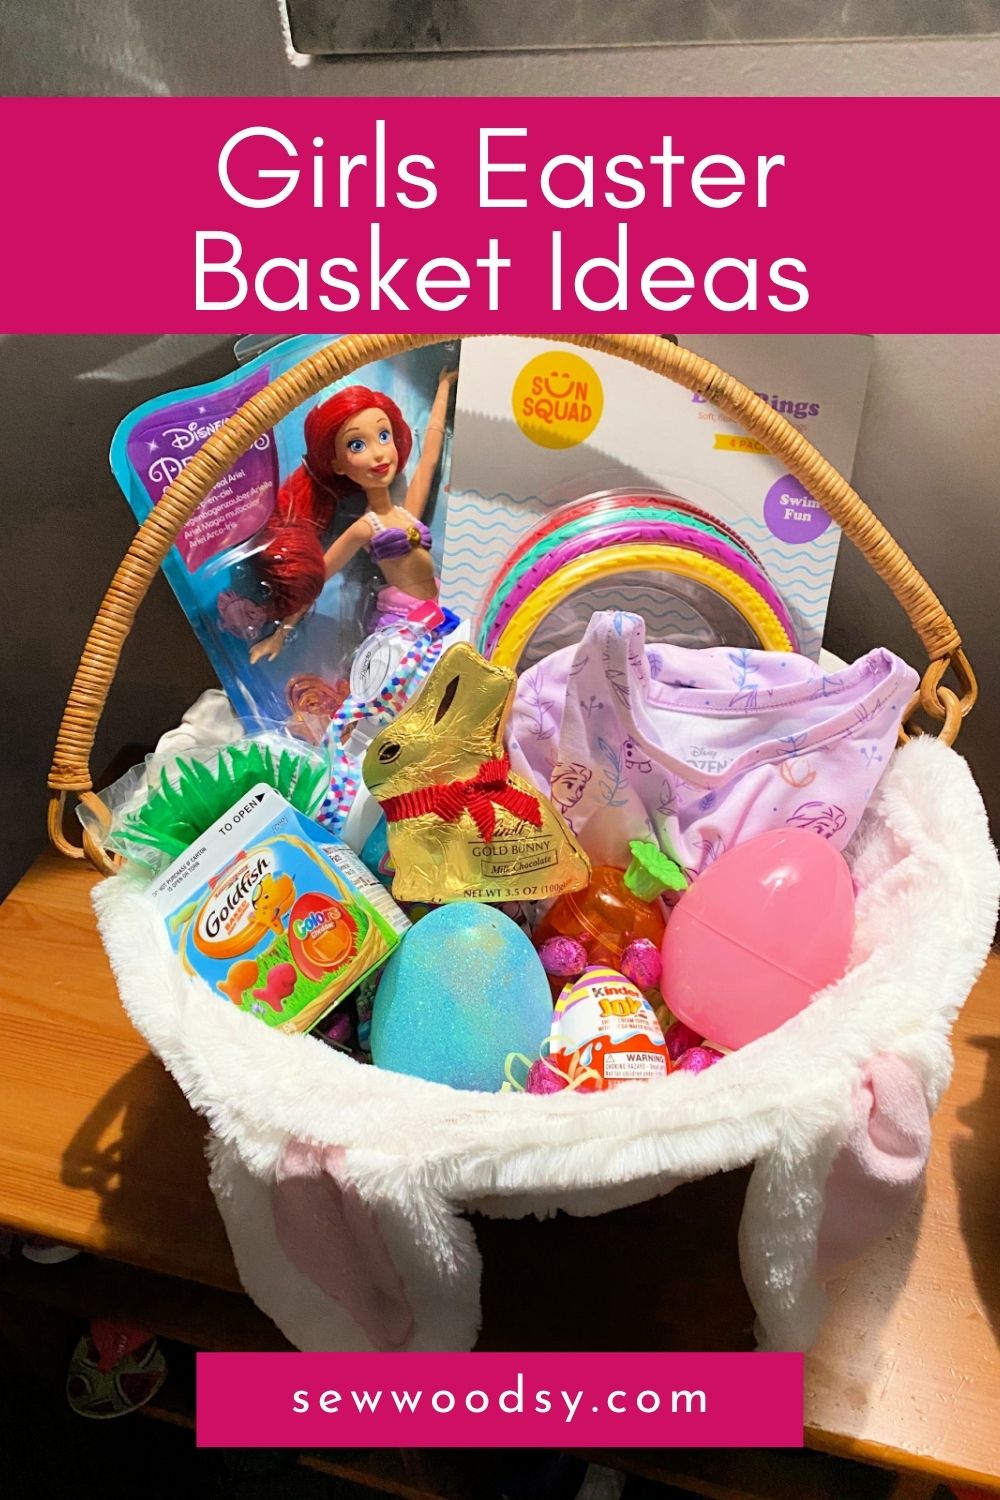 Easter basket filled with dolls, candy, and clothes with text on image for Pinterest.